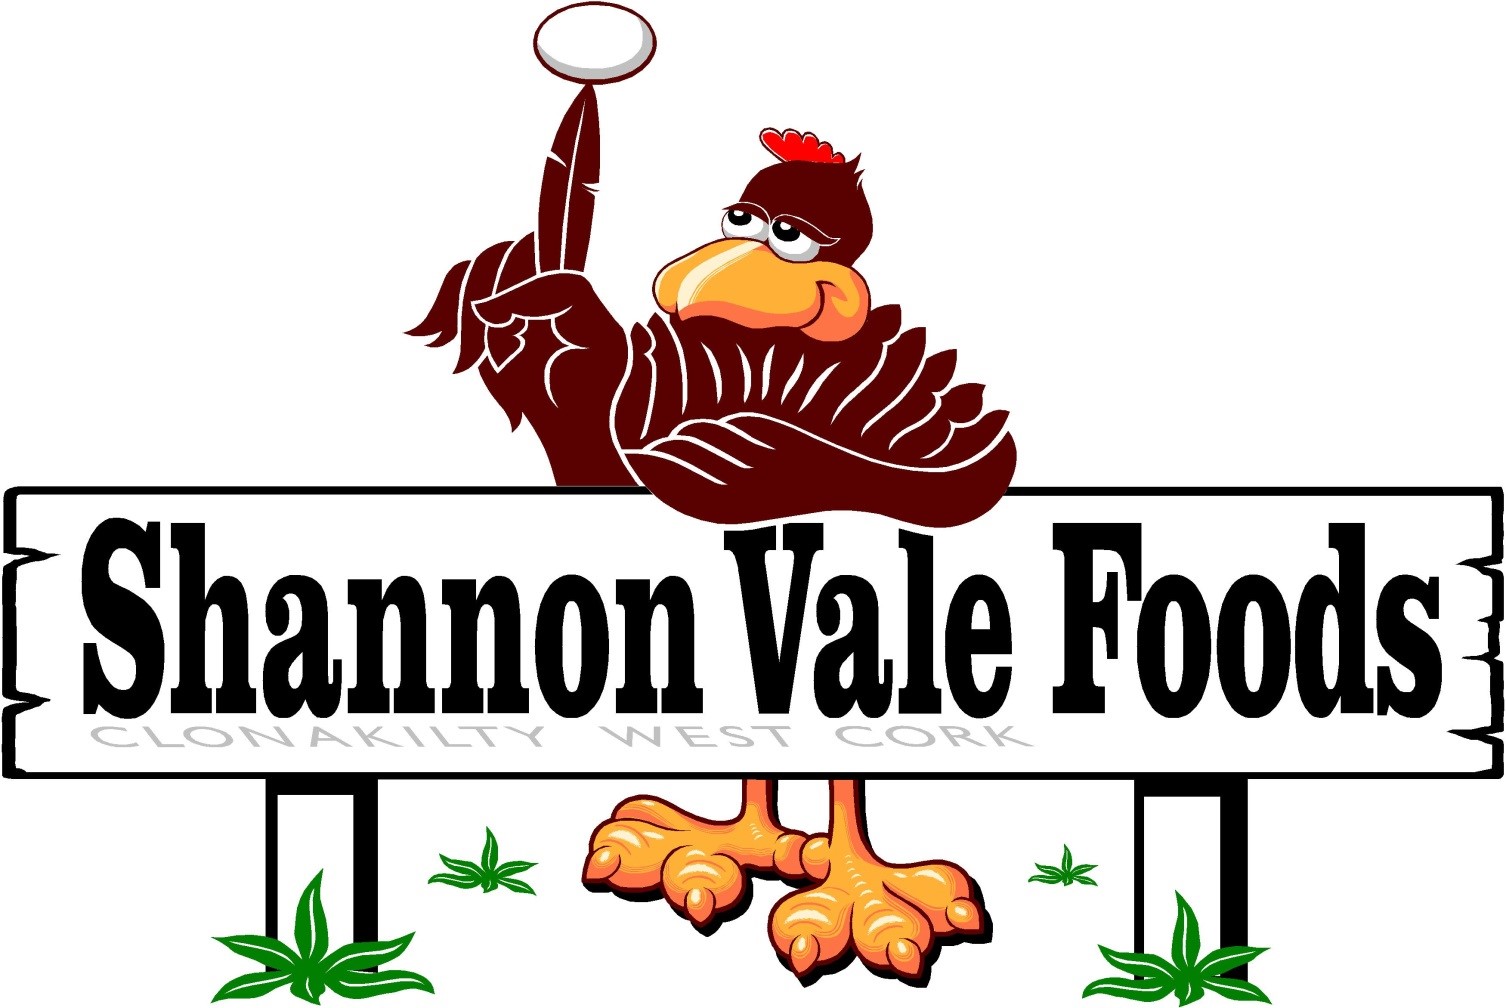 Image of Shannon Vale Foods logotype